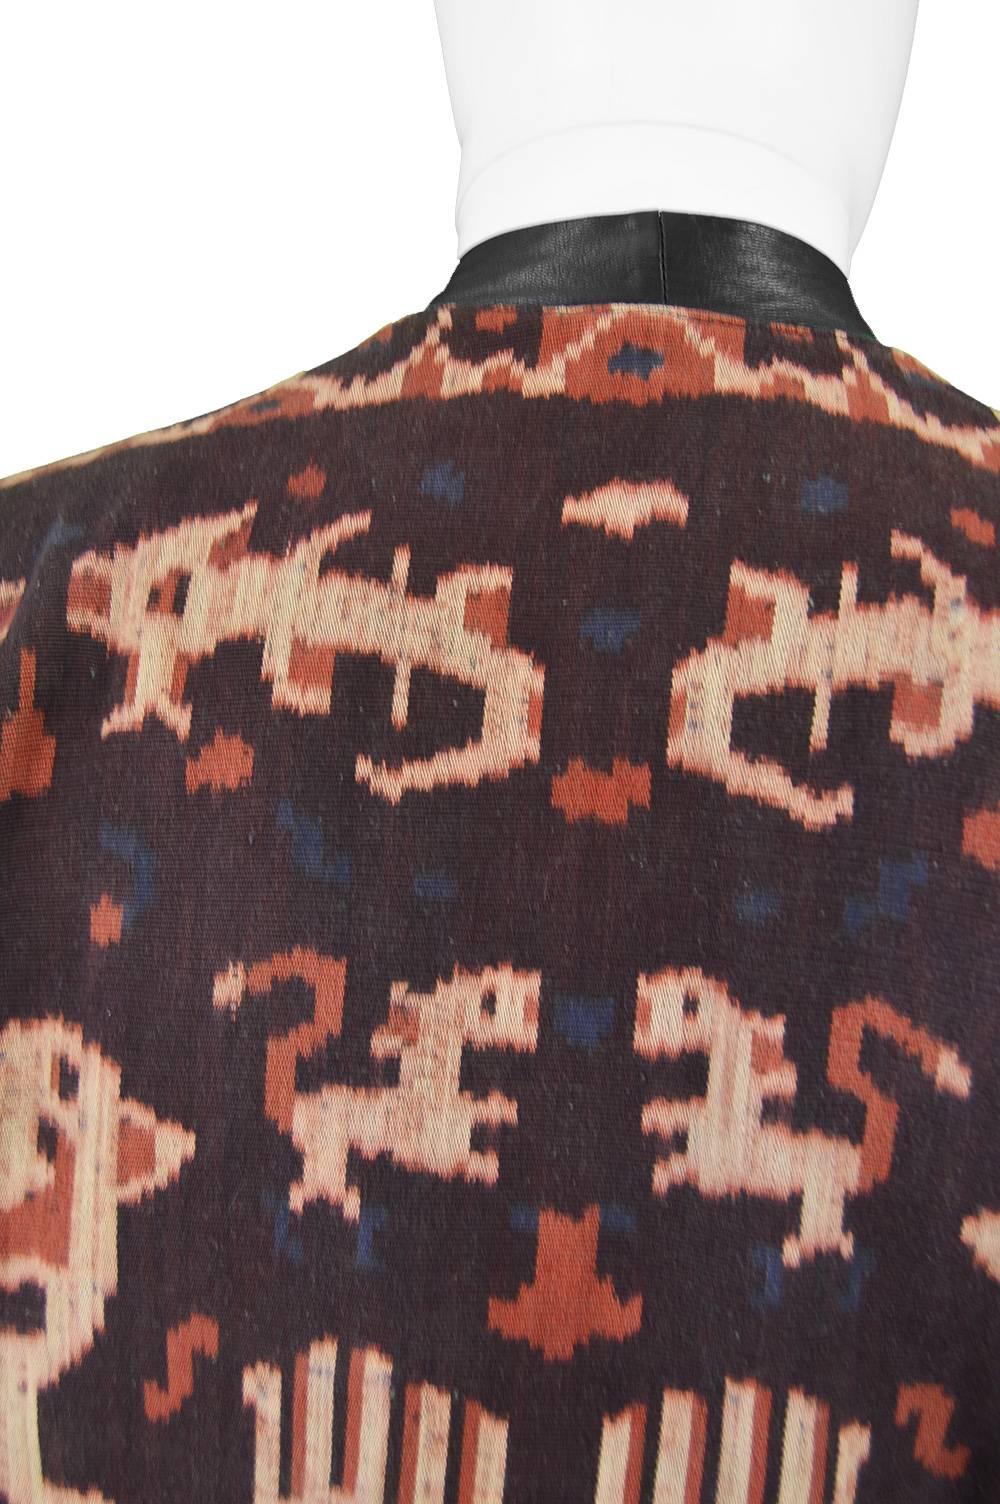 Abrasive Aorta Men's Vintage Leather and Handwoven Ikat Tapestry Jacket, 1980s 1